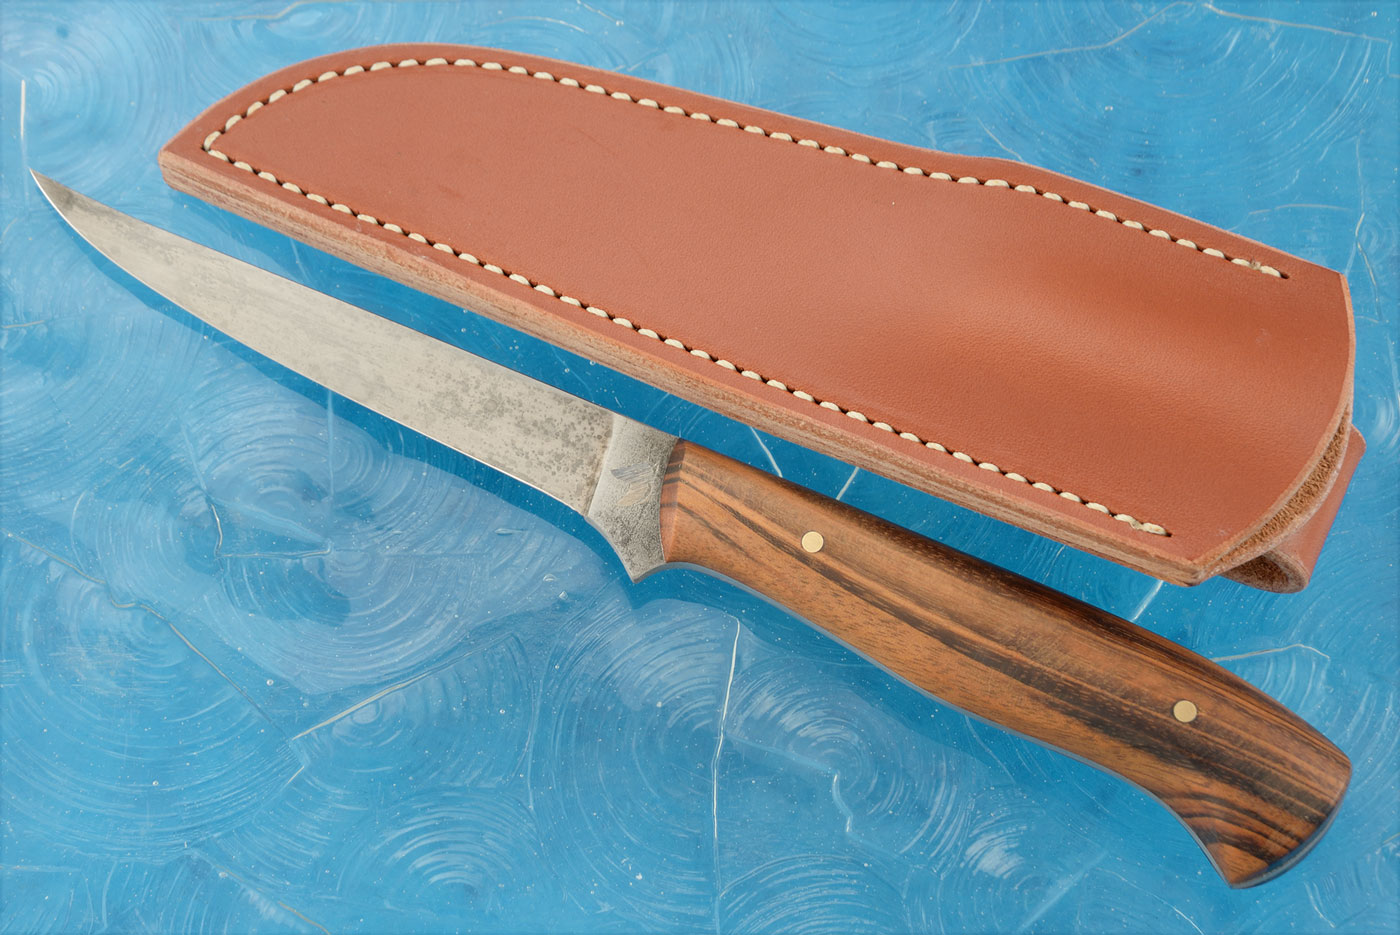 Bird and Trout (Fillet/Boner) with Tigerwood